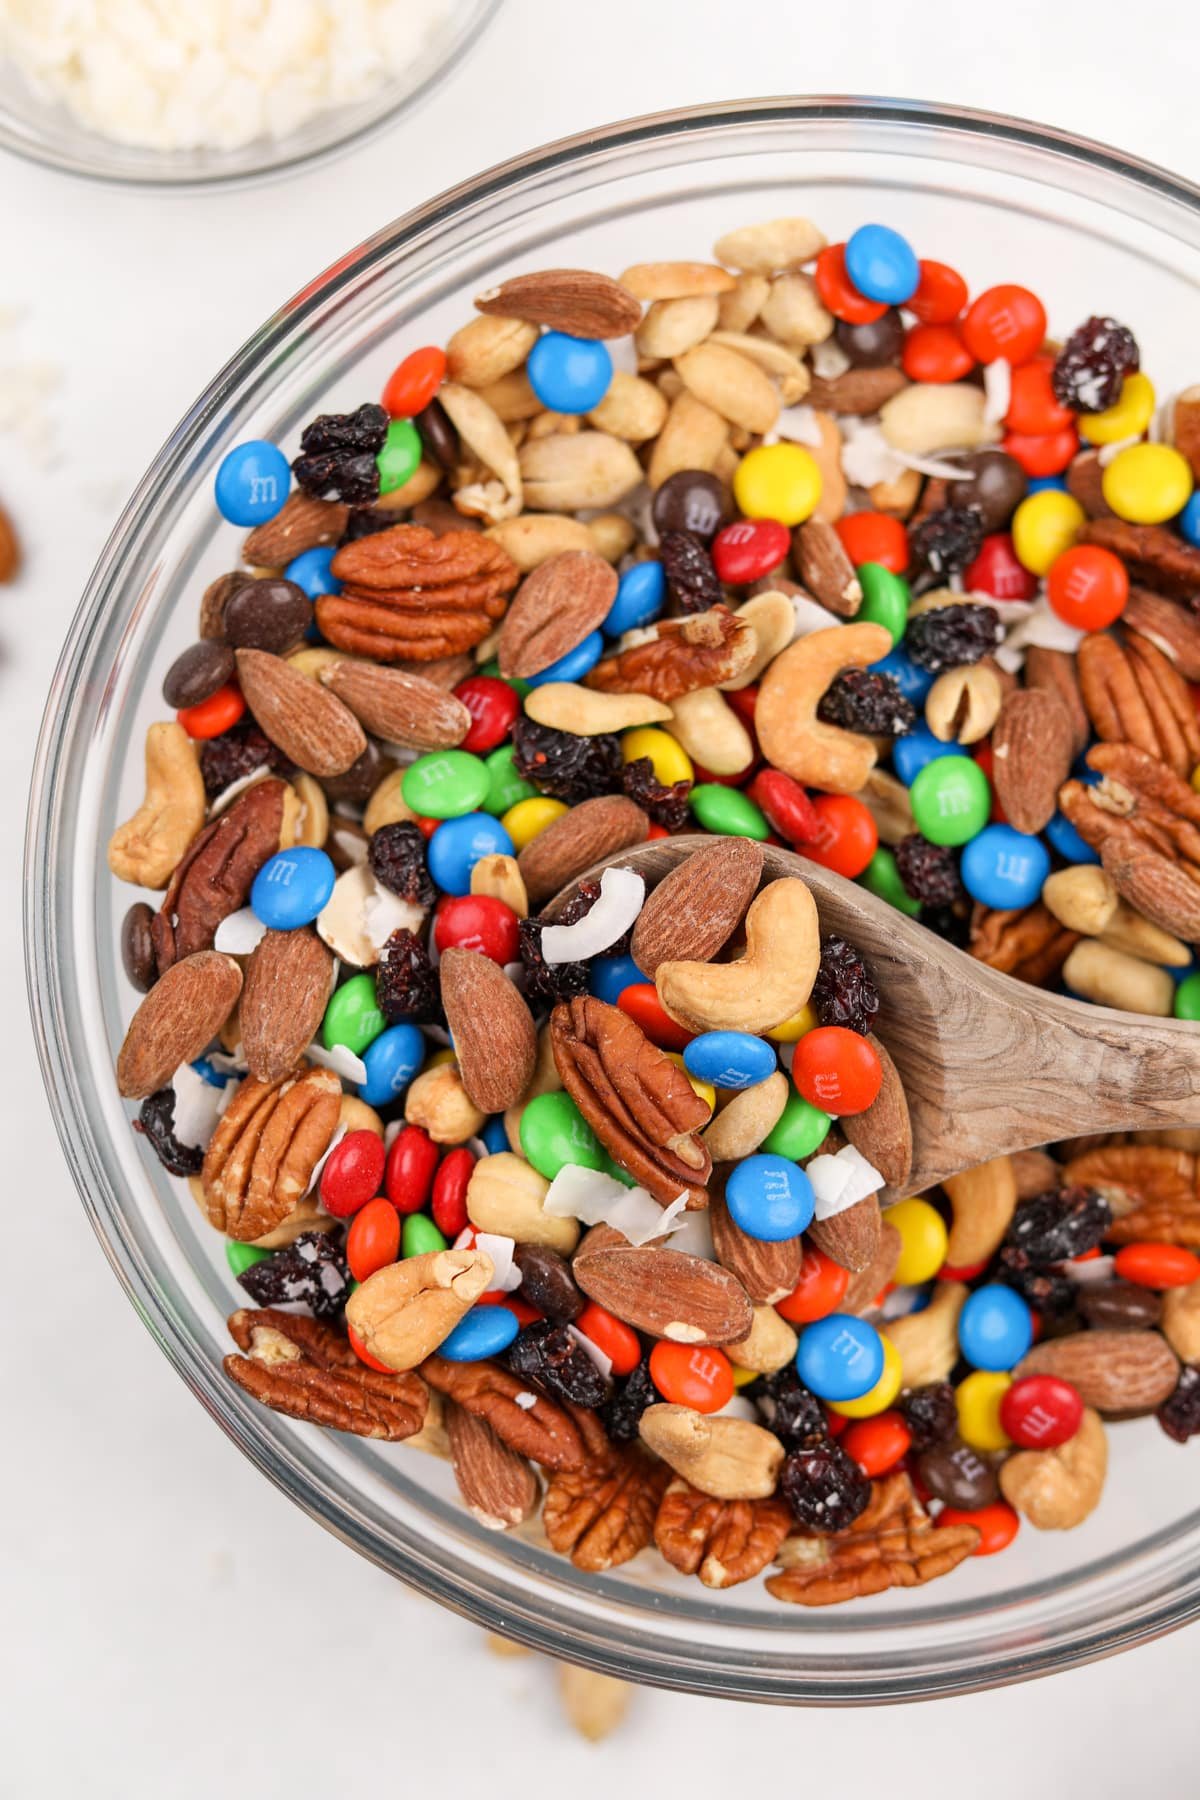 A large bowl of trail mix being scooped with a wooden spoon.